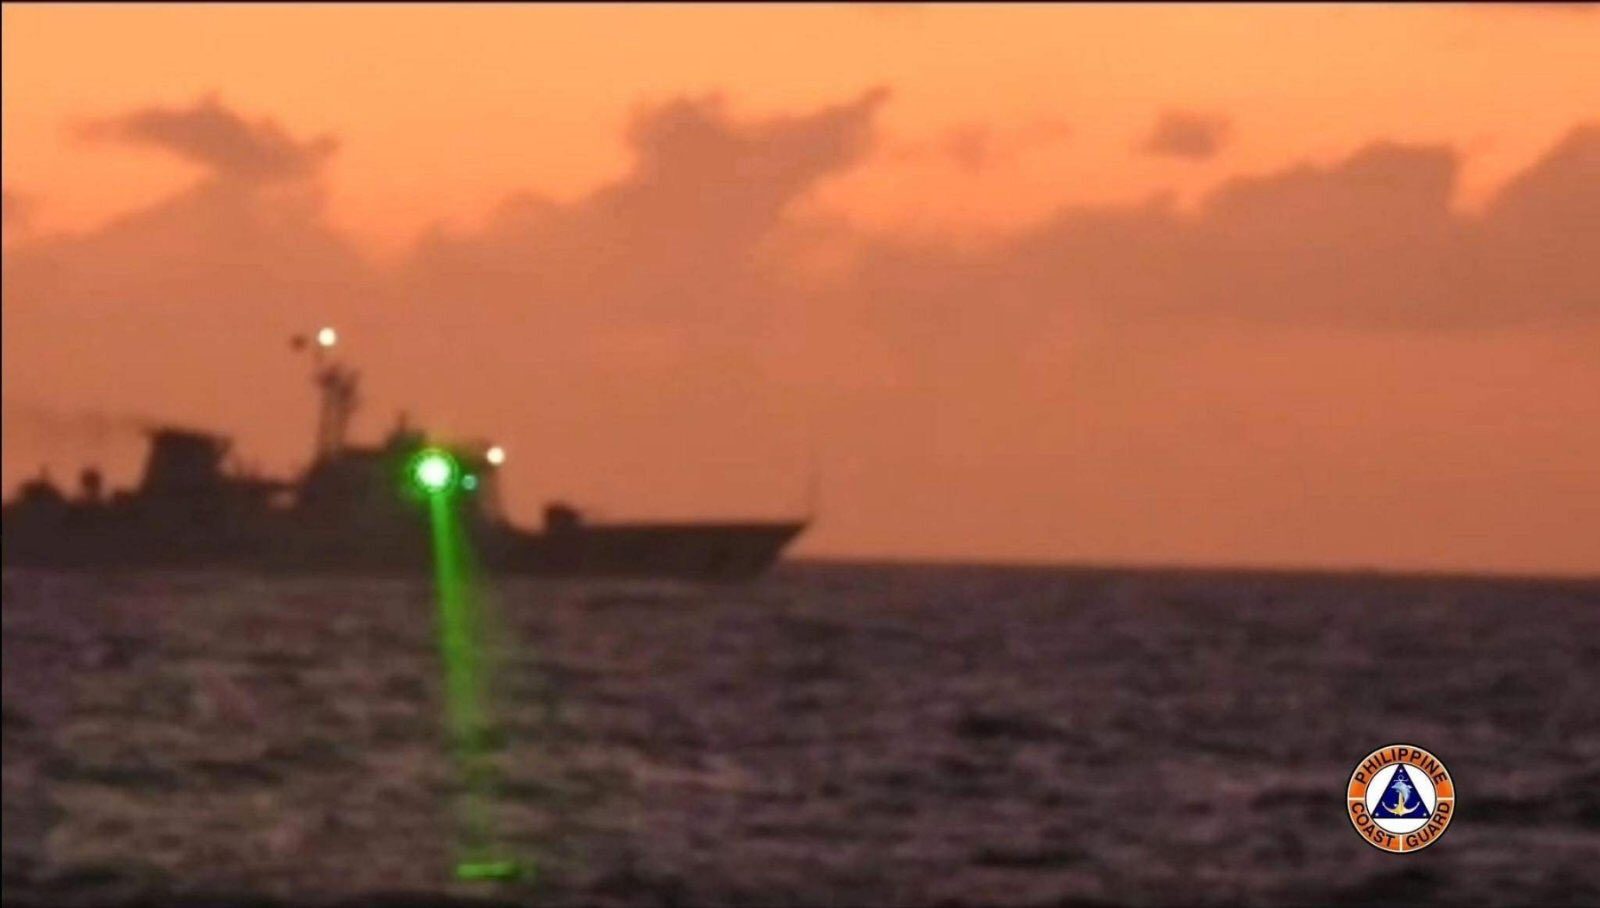 ‘Acts of aggression:’ Philippines protests China’s use of military laser in West PH Sea